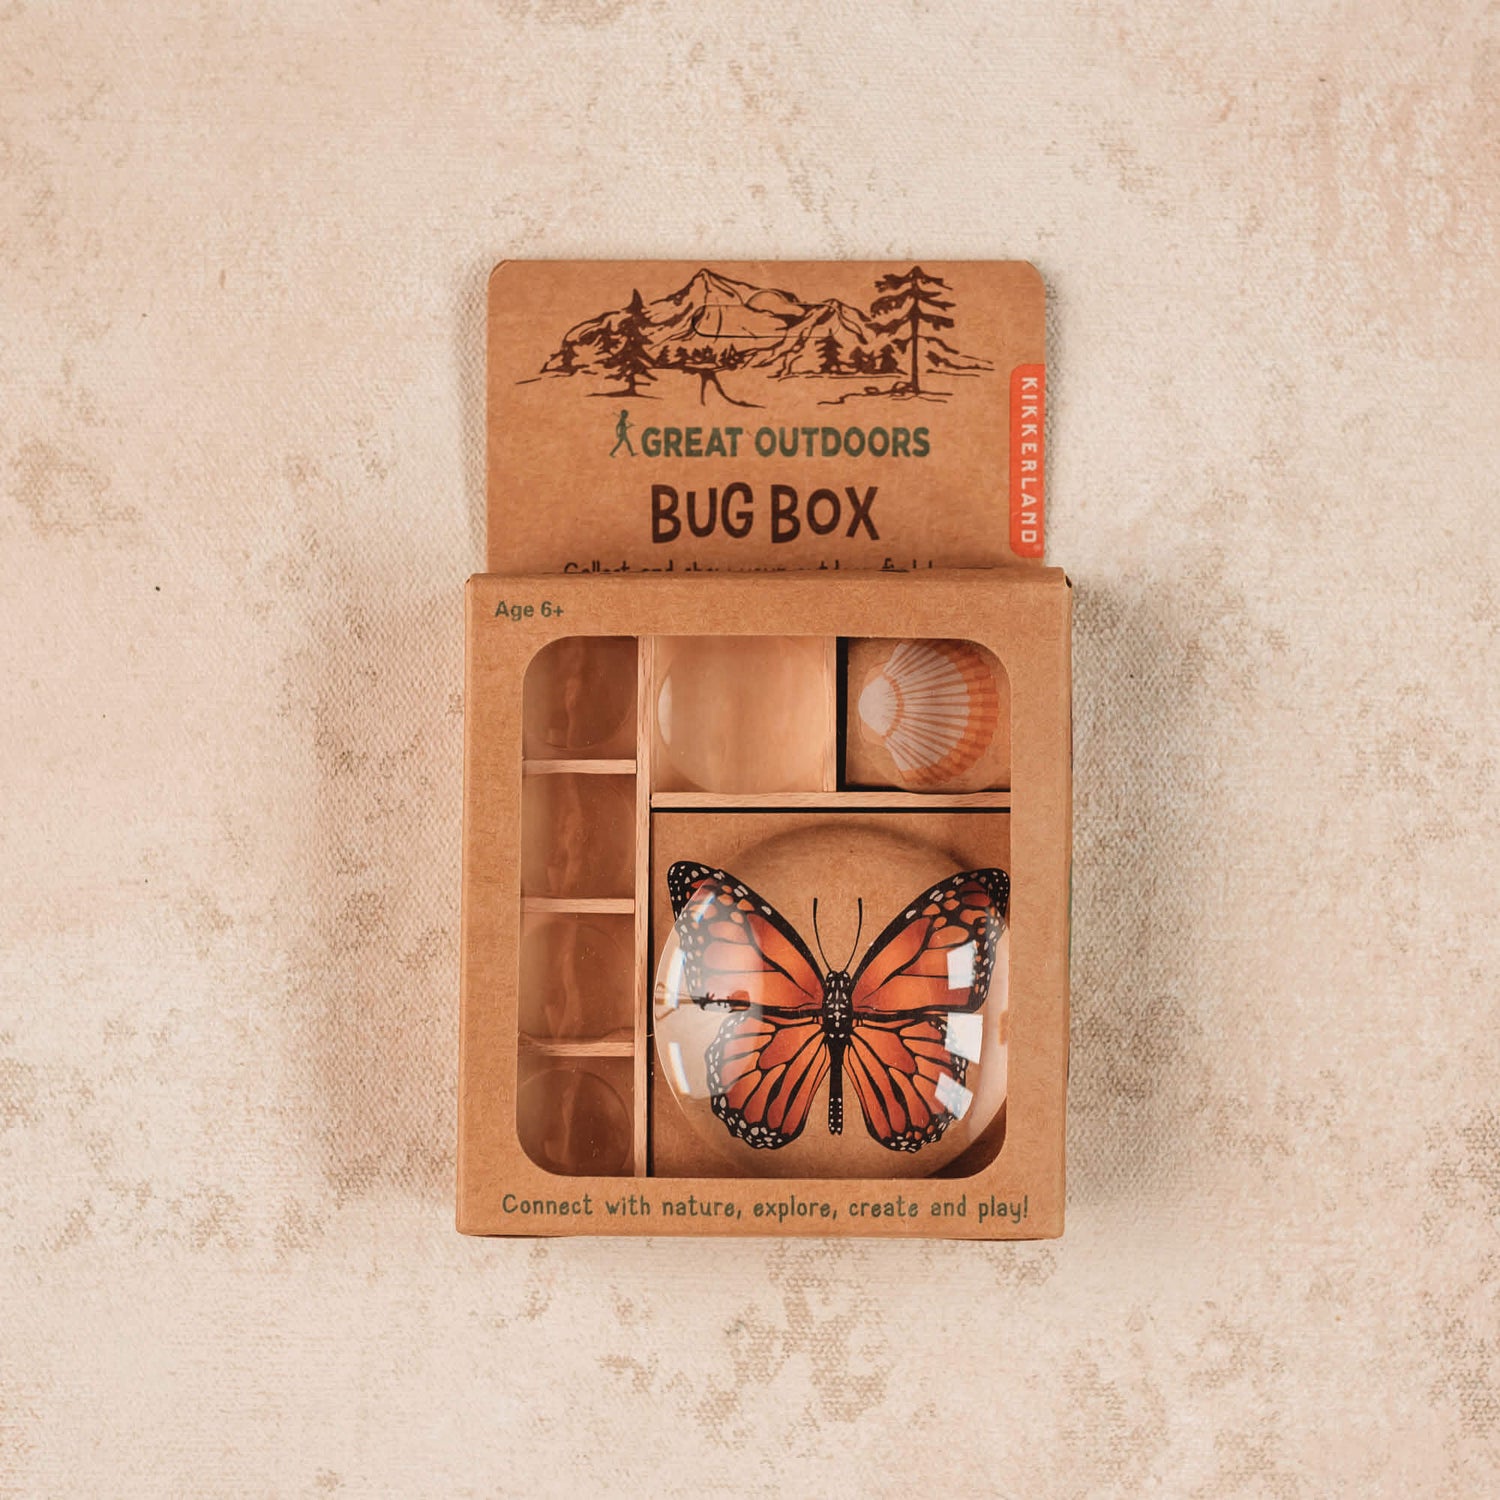 Wooden bug box made by Kikkerland from Your Wild Books.